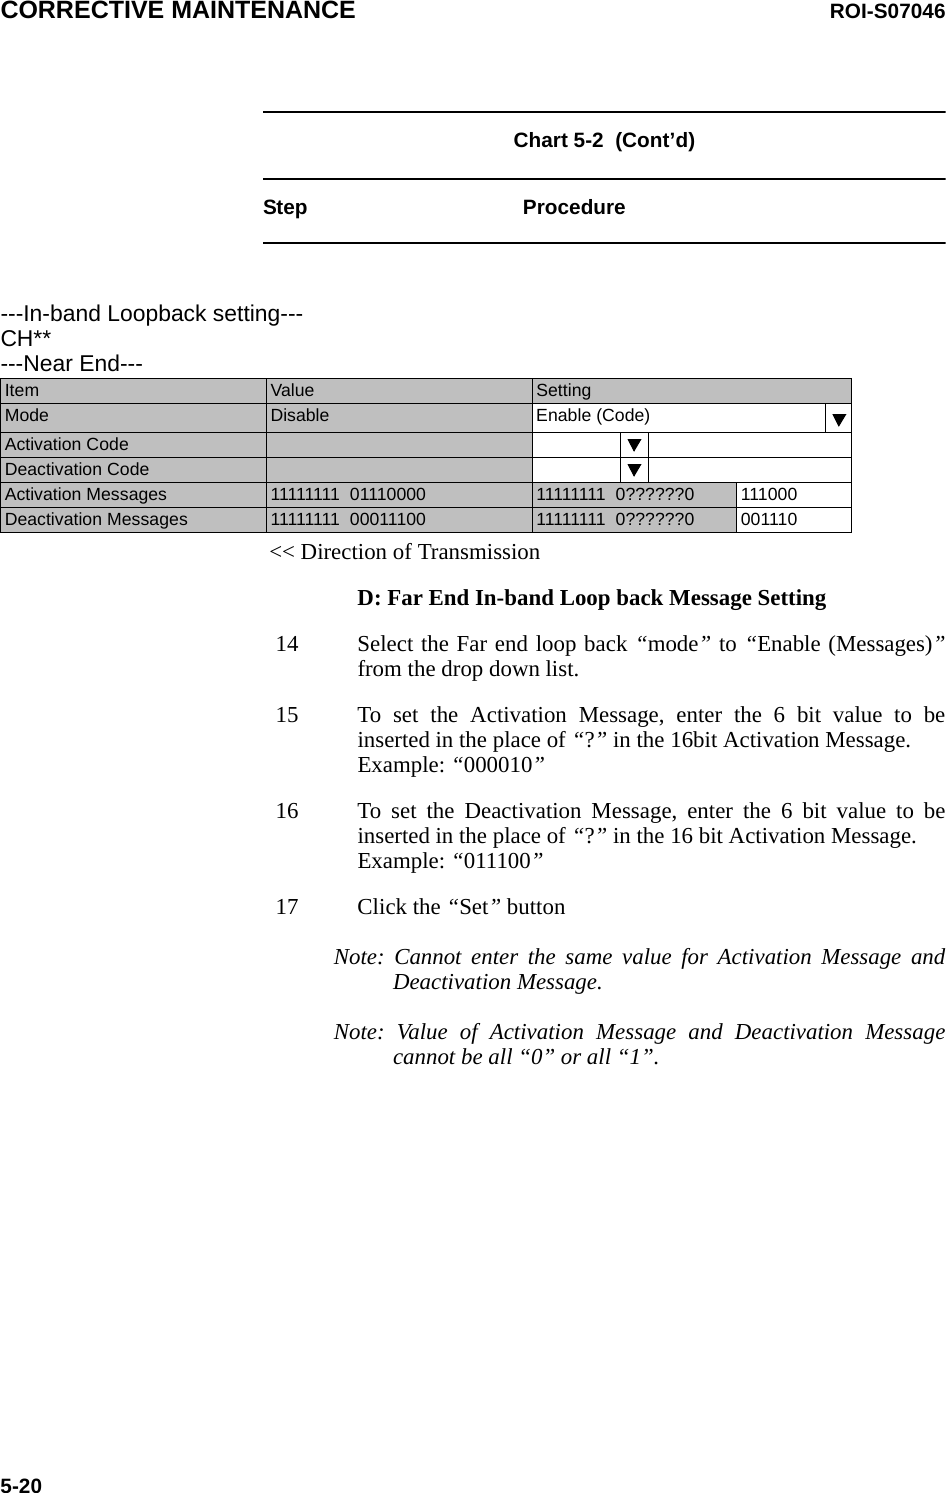 CORRECTIVE MAINTENANCE ROI-S070465-20Chart 5-2  (Cont’d)Step Procedure&lt;&lt; Direction of TransmissionD: Far End In-band Loop back Message Setting14 Select the Far end loop back “mode” to “Enable (Messages)”from the drop down list.15 To set the Activation Message, enter the 6 bit value to beinserted in the place of “?” in the 16bit Activation Message. Example: “000010”16 To set the Deactivation Message, enter the 6 bit value to beinserted in the place of “?” in the 16 bit Activation Message.Example: “011100”17 Click the “Set” buttonNote: Cannot enter the same value for Activation Message andDeactivation Message.Note: Value of Activation Message and Deactivation Messagecannot be all “0” or all “1”.---In-band Loopback setting---CH**---Near End---Item  Value  SettingMode Disable Enable (Code)Activation CodeDeactivation CodeActivation Messages 11111111  01110000 11111111  0??????0 111000Deactivation Messages 11111111  00011100 11111111  0??????0 001110